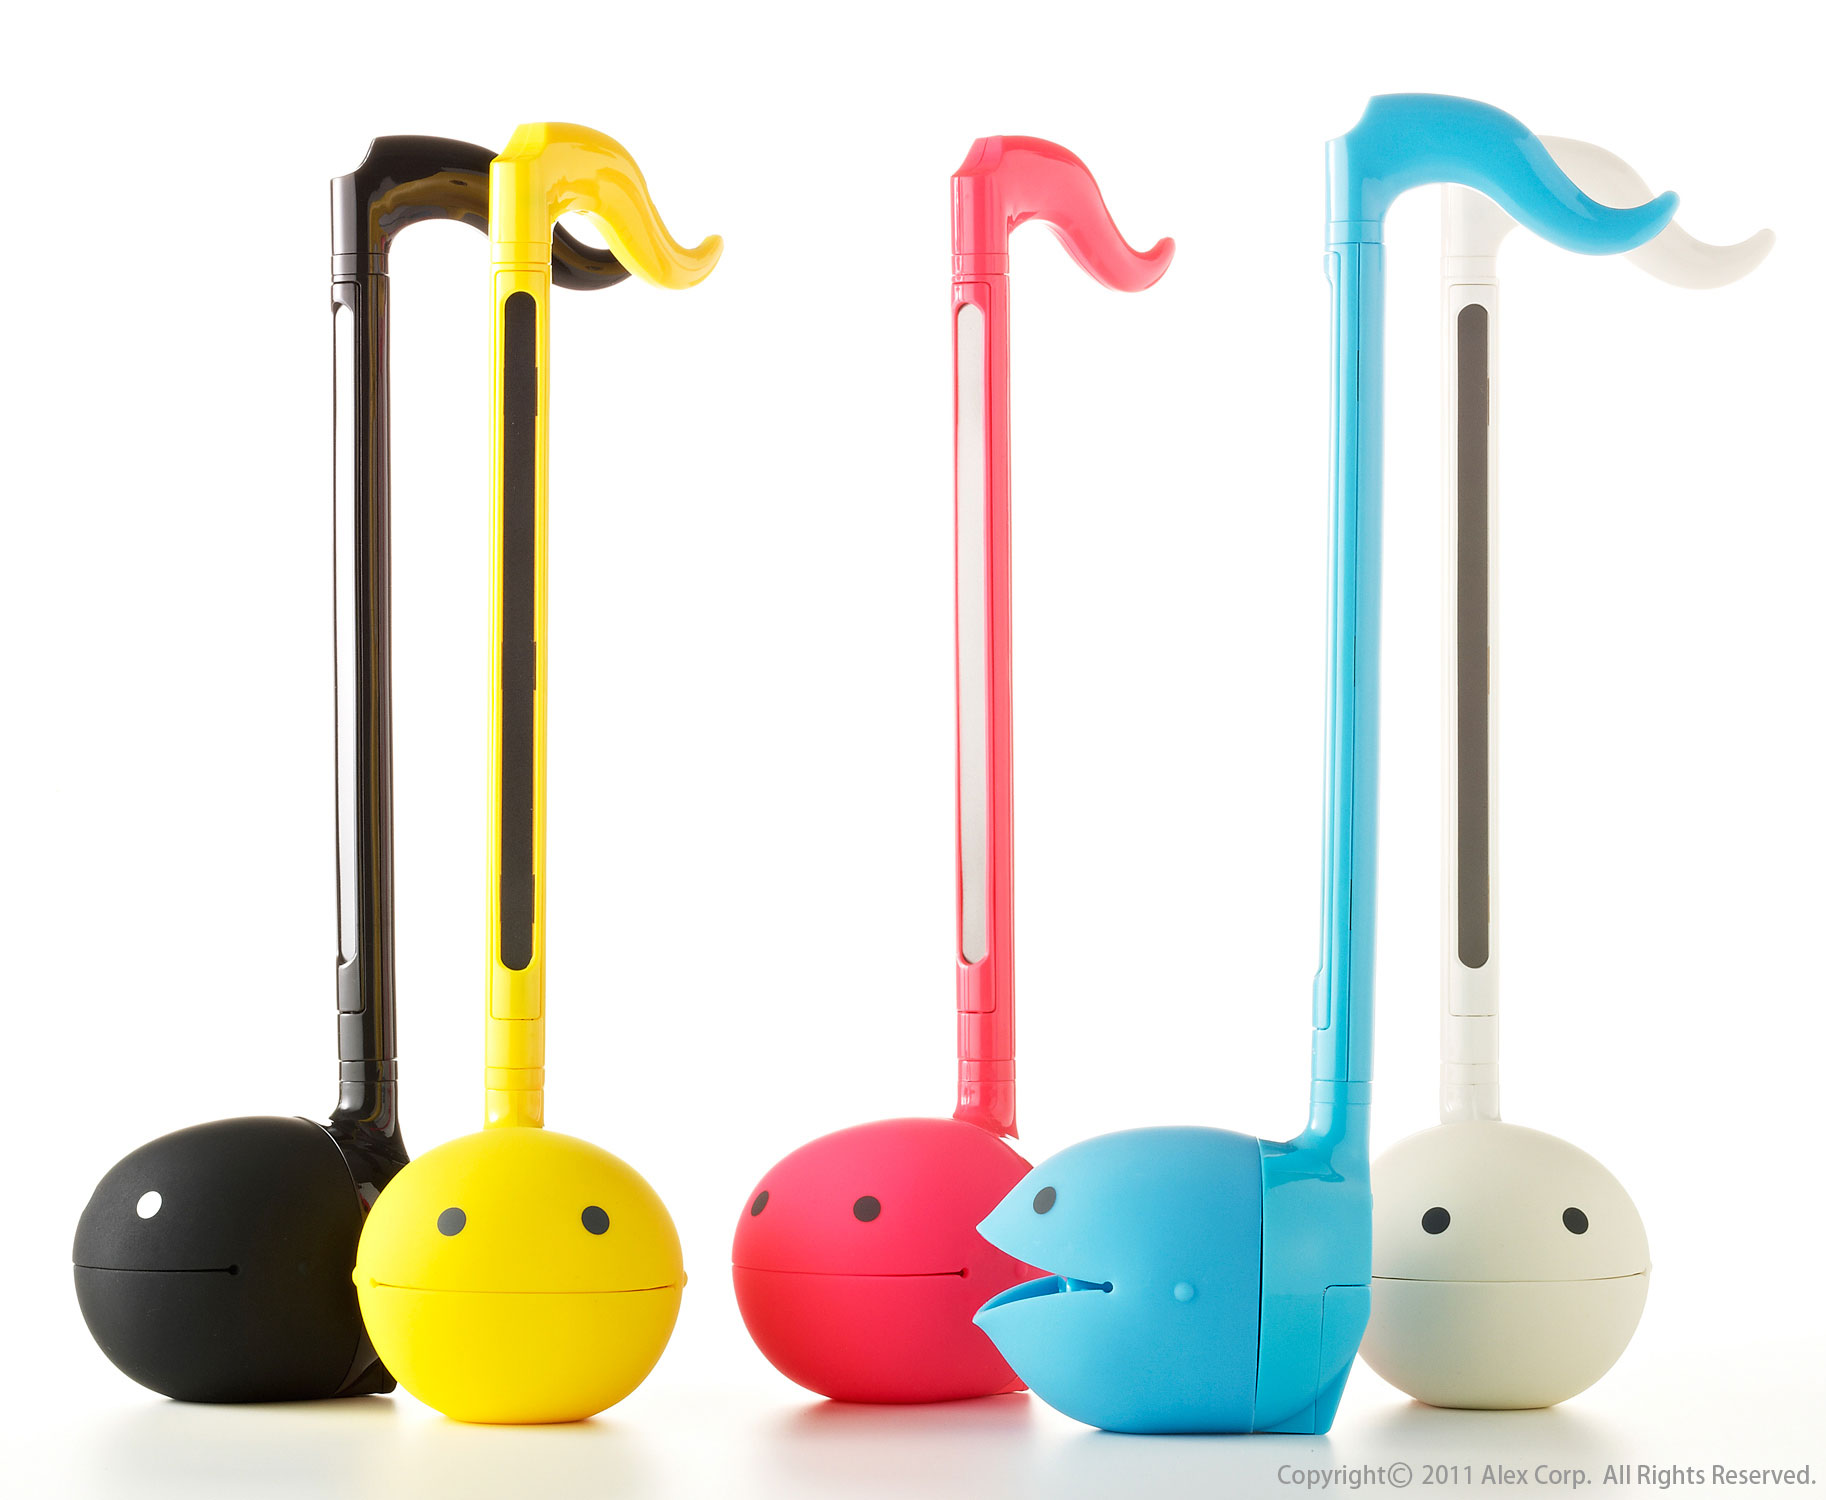 Blue + Yellow Japanese Electronic Musical Instrument Portable Synthesizer from Japan by Cube/Maywa Denki OtamatoneSPECIAL COLOR COLLECTION SET Japanese Edition 